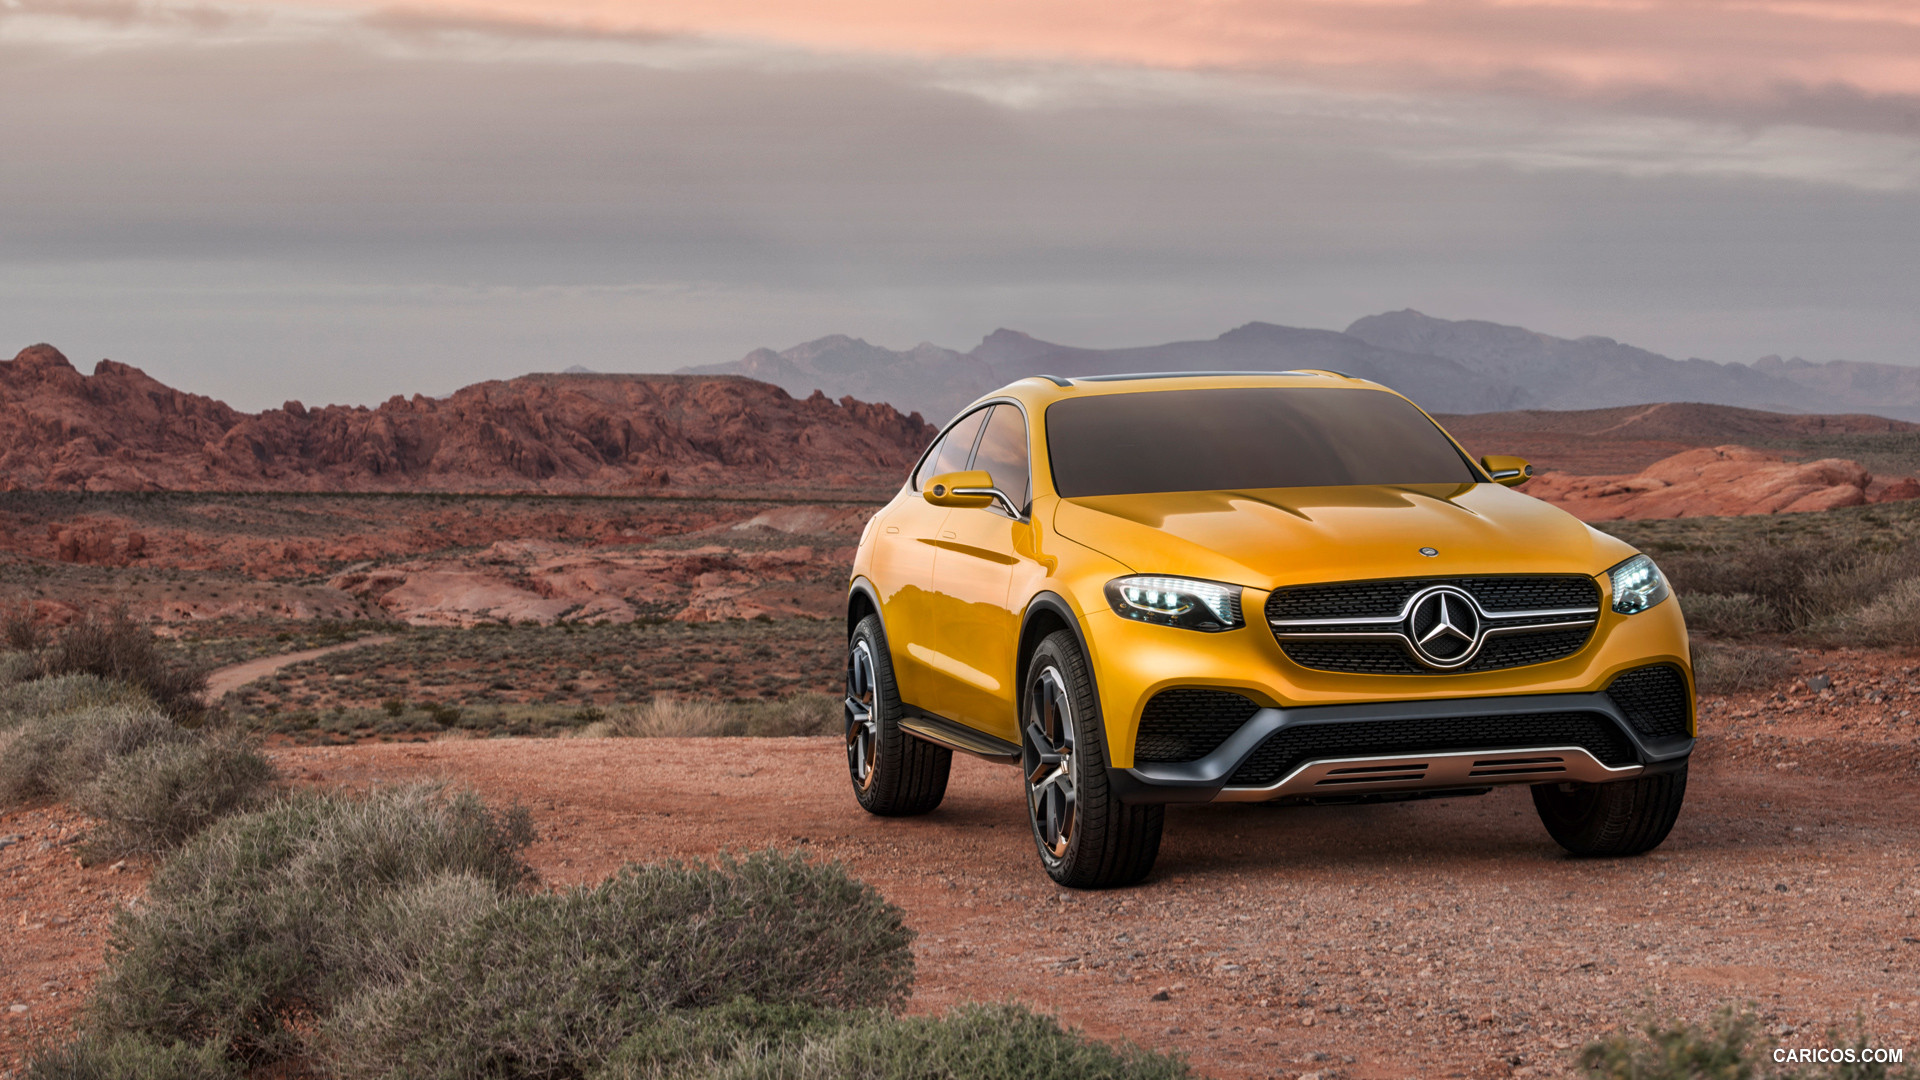 2015 Mercedes-Benz GLC Coupe Concept  - Front, #4 of 16